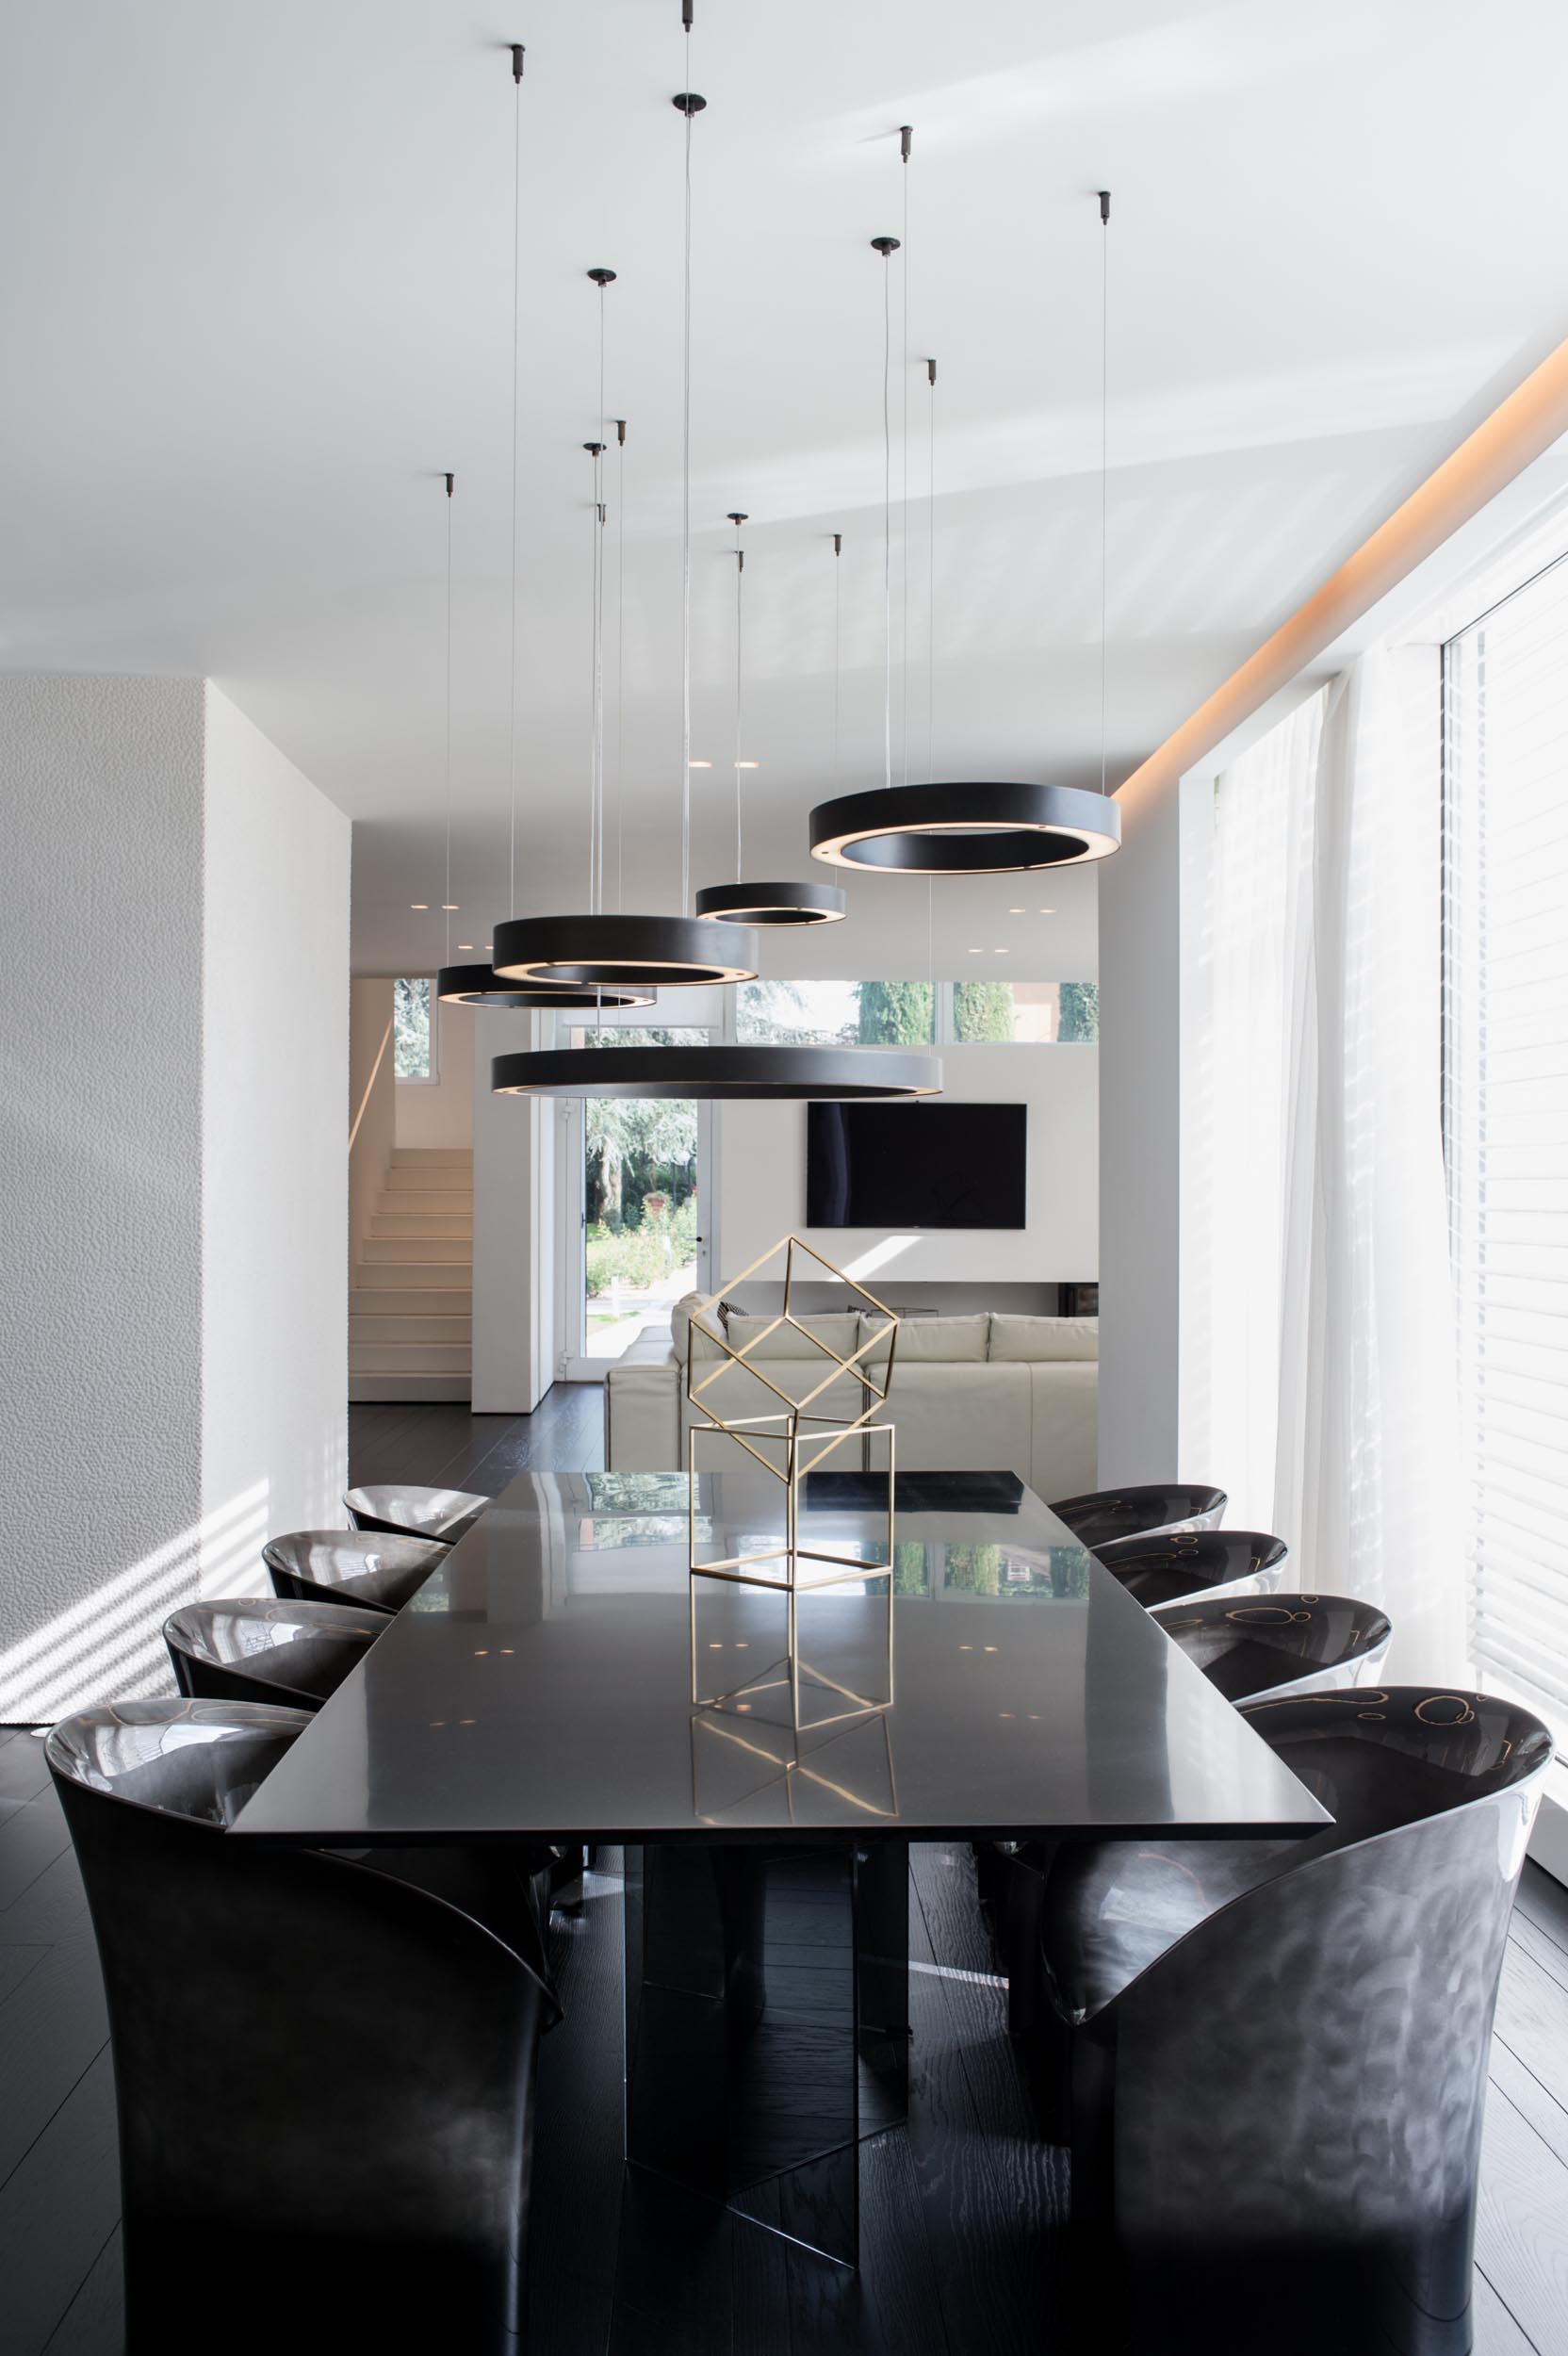 A modern dining room with circular pendant lights hanging above the black dining table, while the surrounding dining chairs are dark with a silvery element.